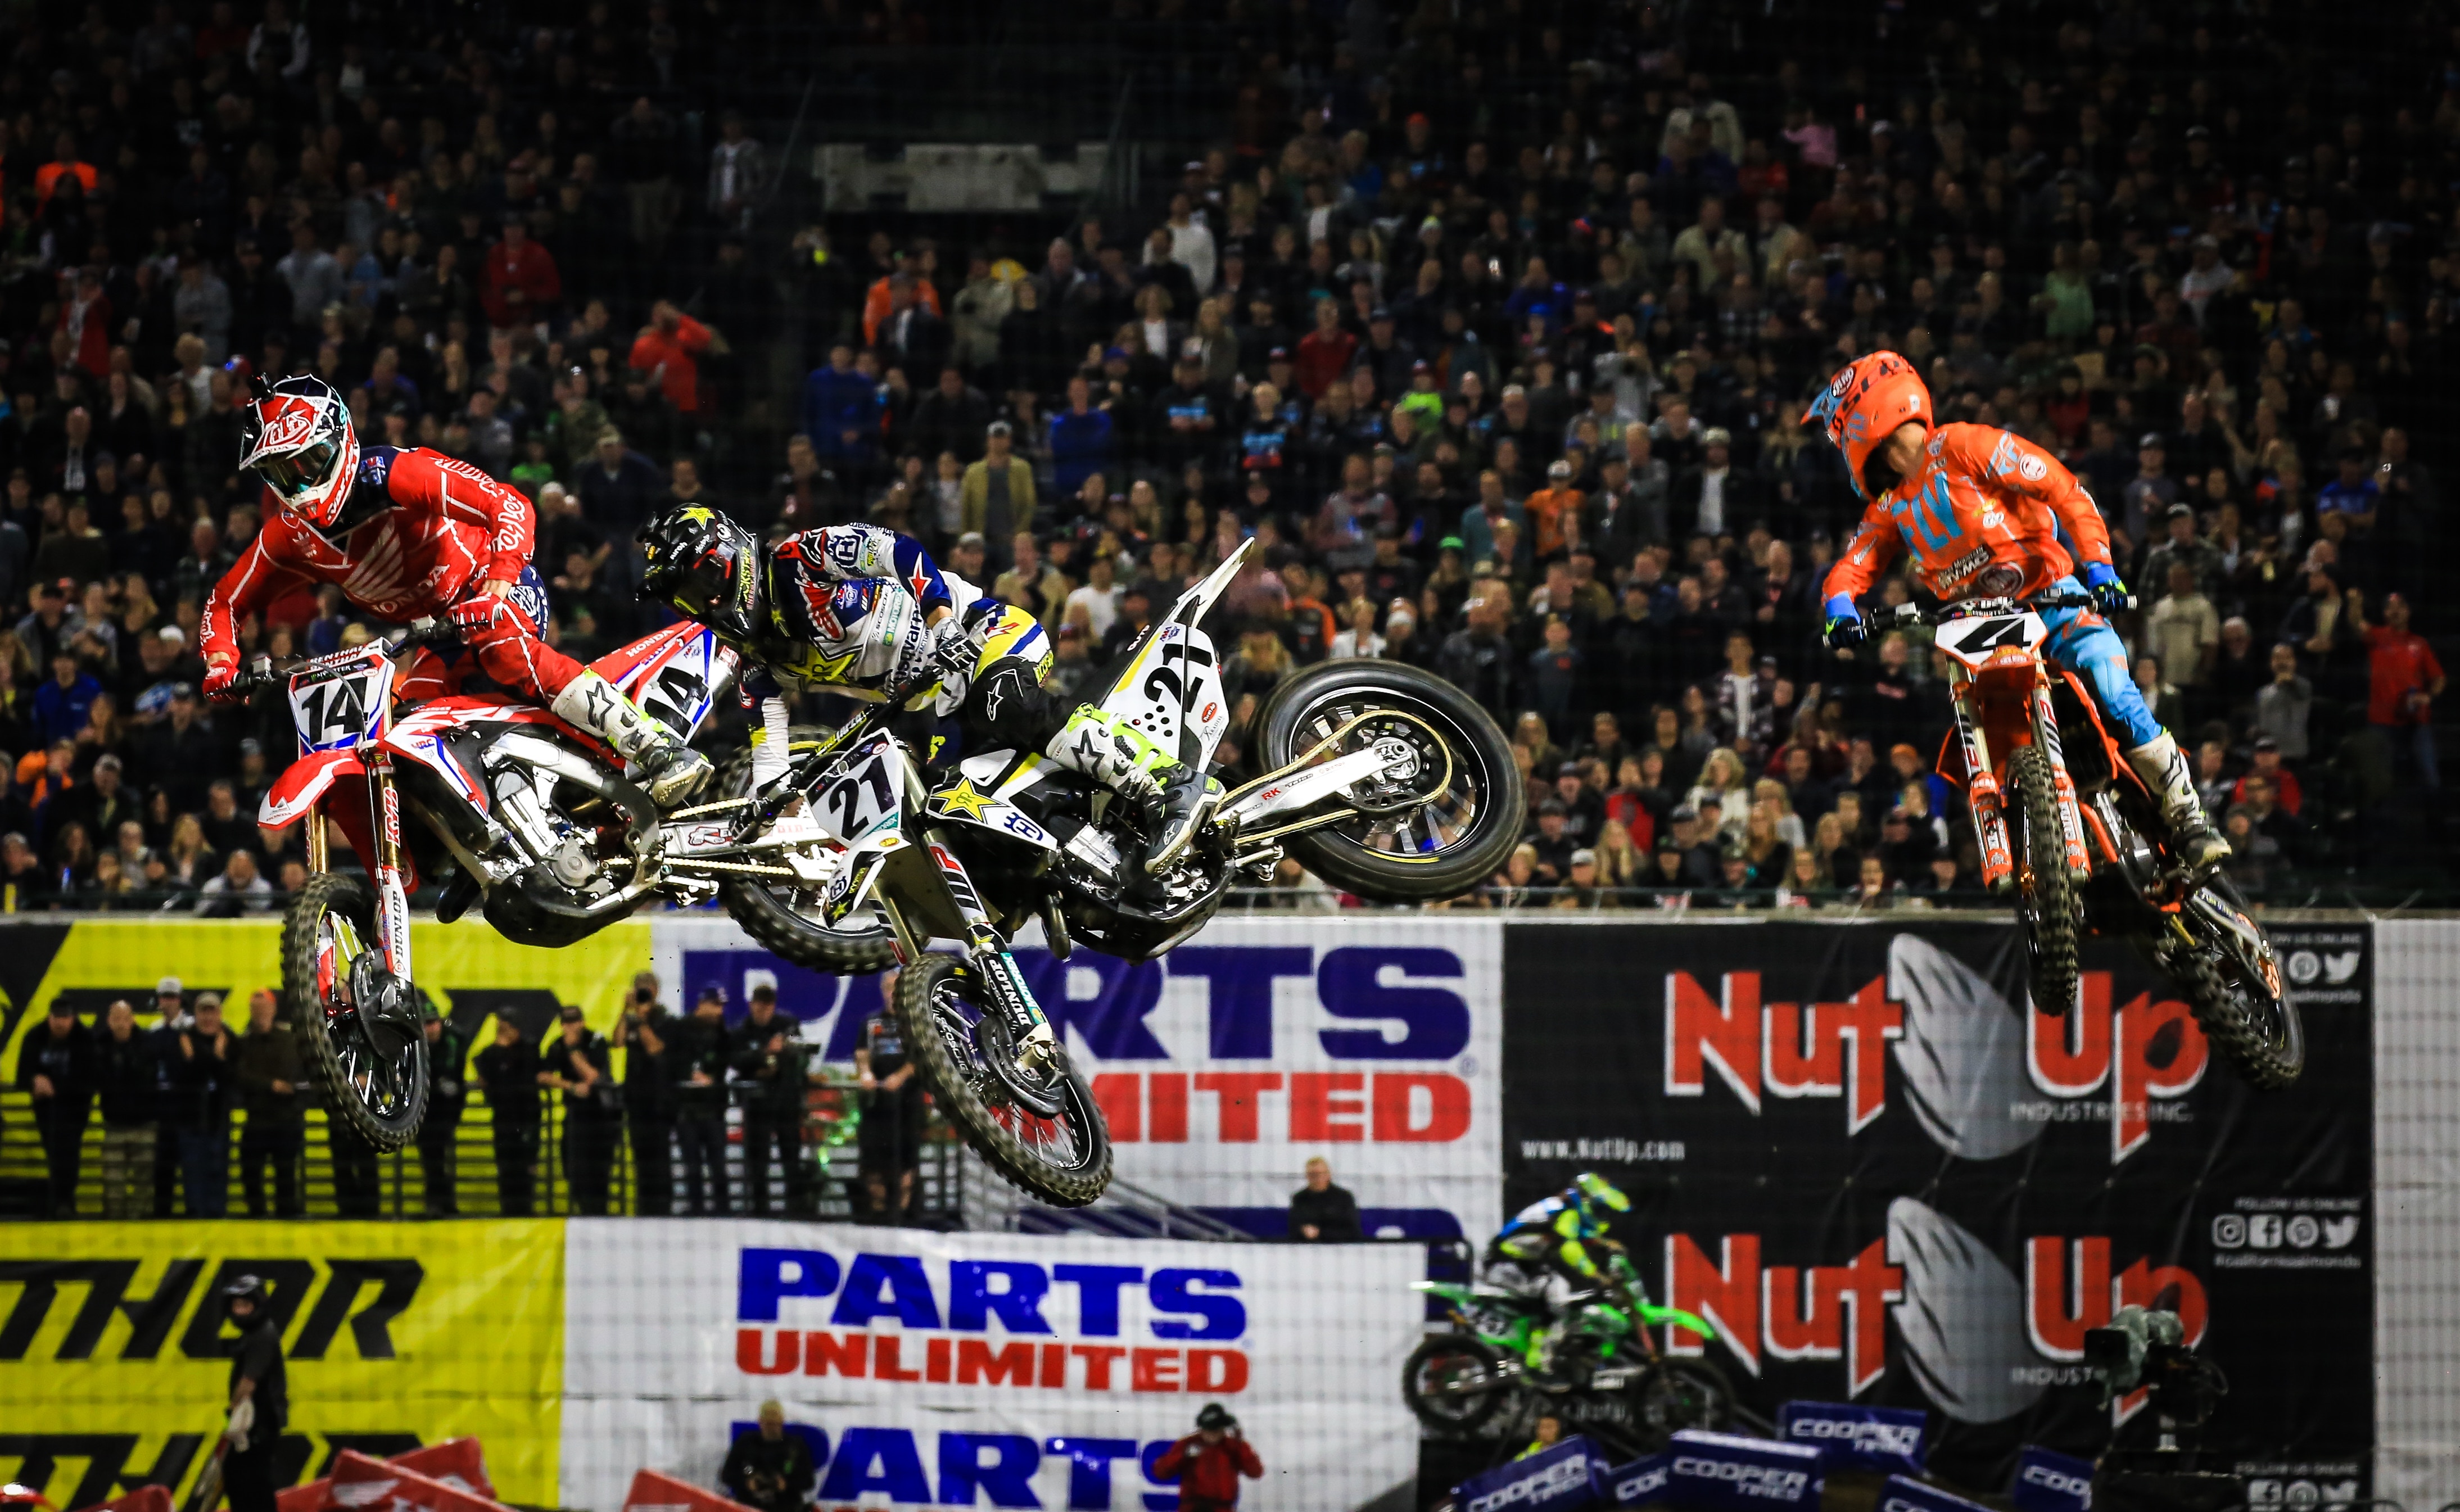 Three dirt bike riders fly through the air as they race around a track with packed stands.